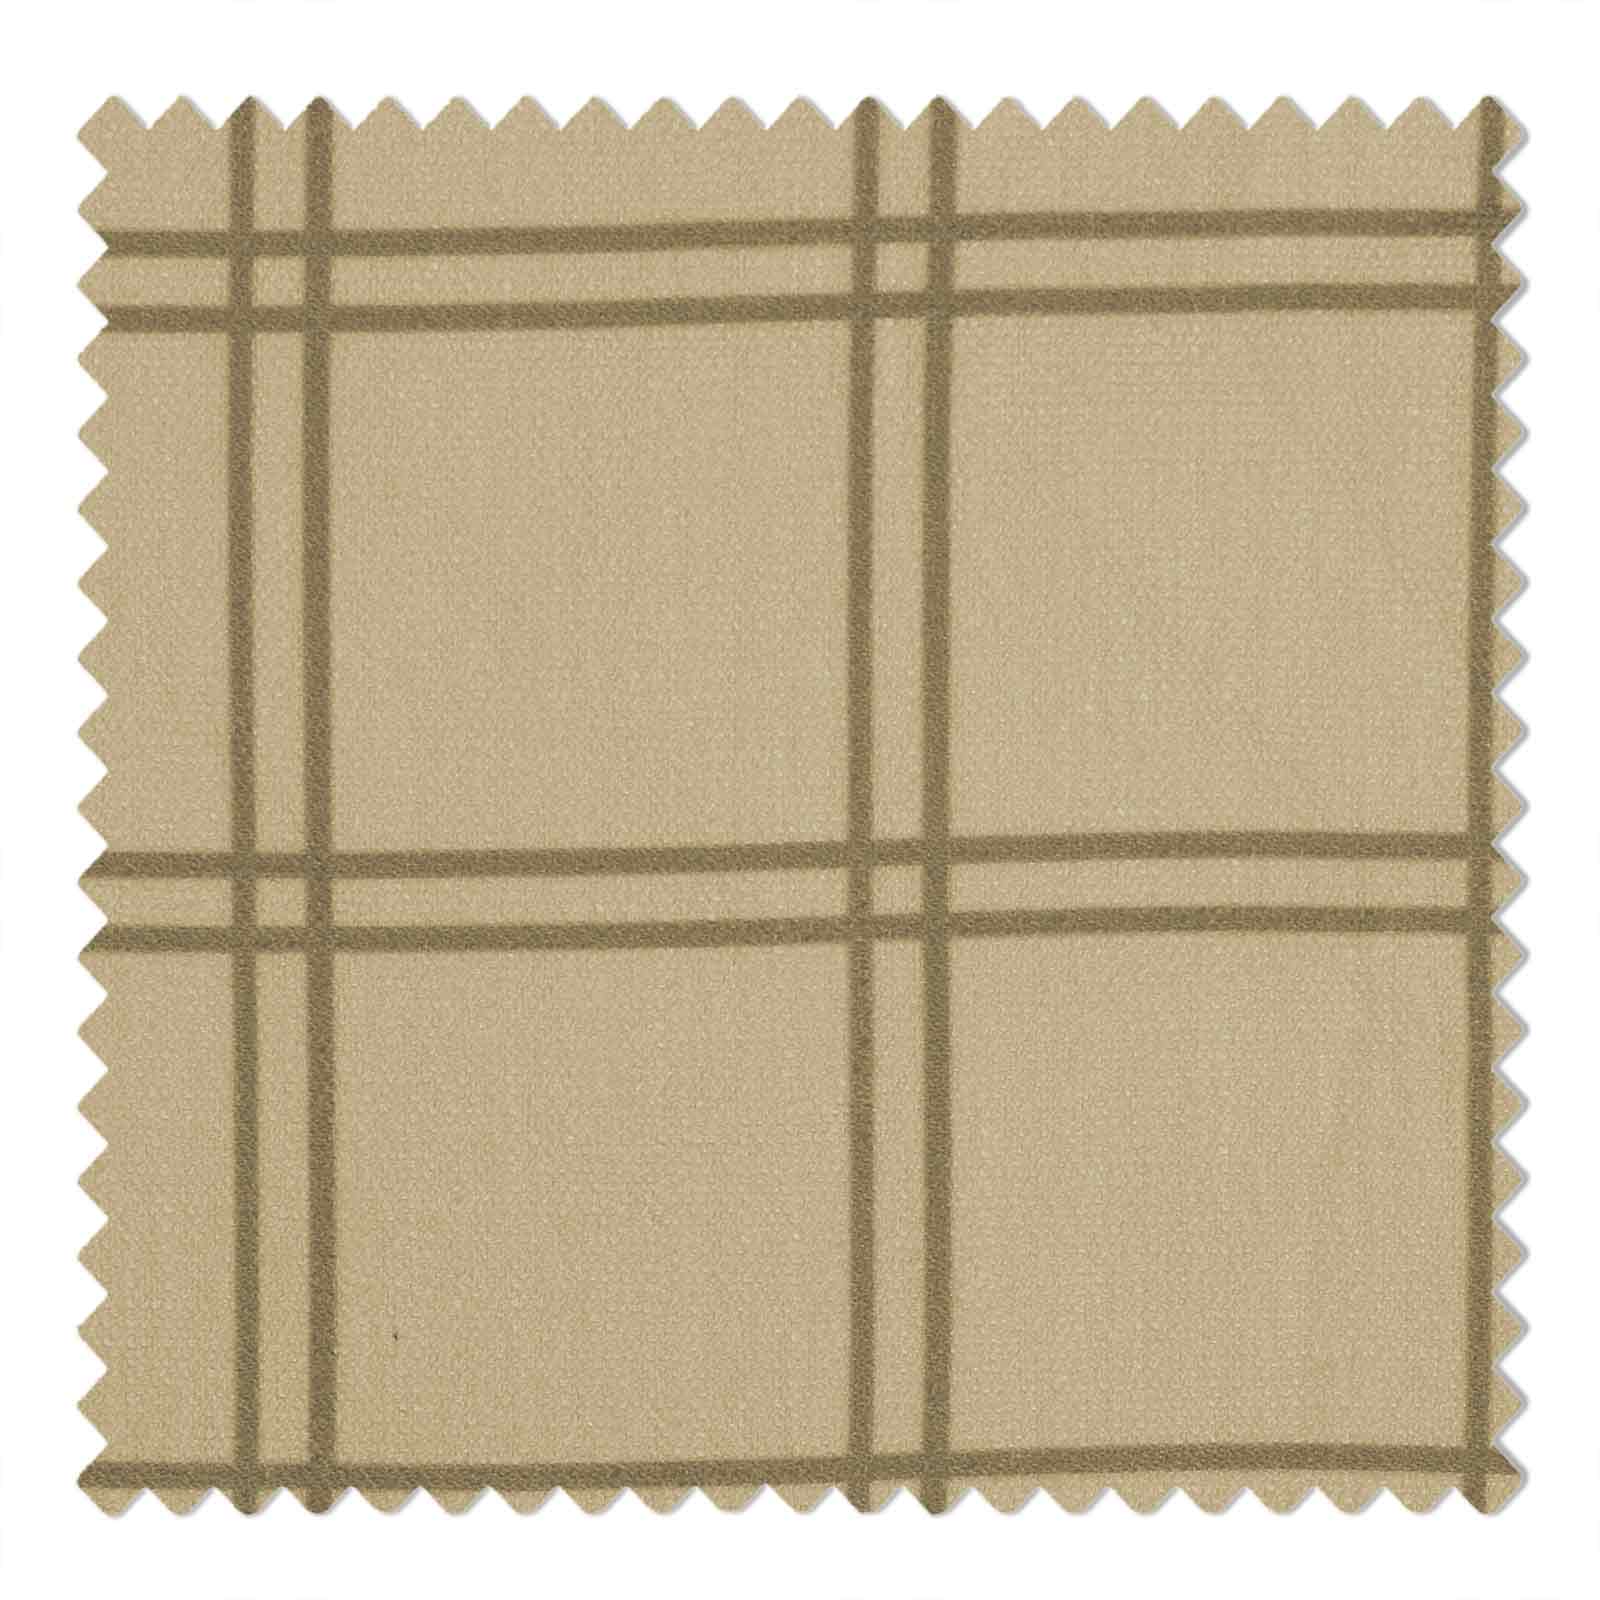 Hand Dyed Fabric Shades - Sepia Brown